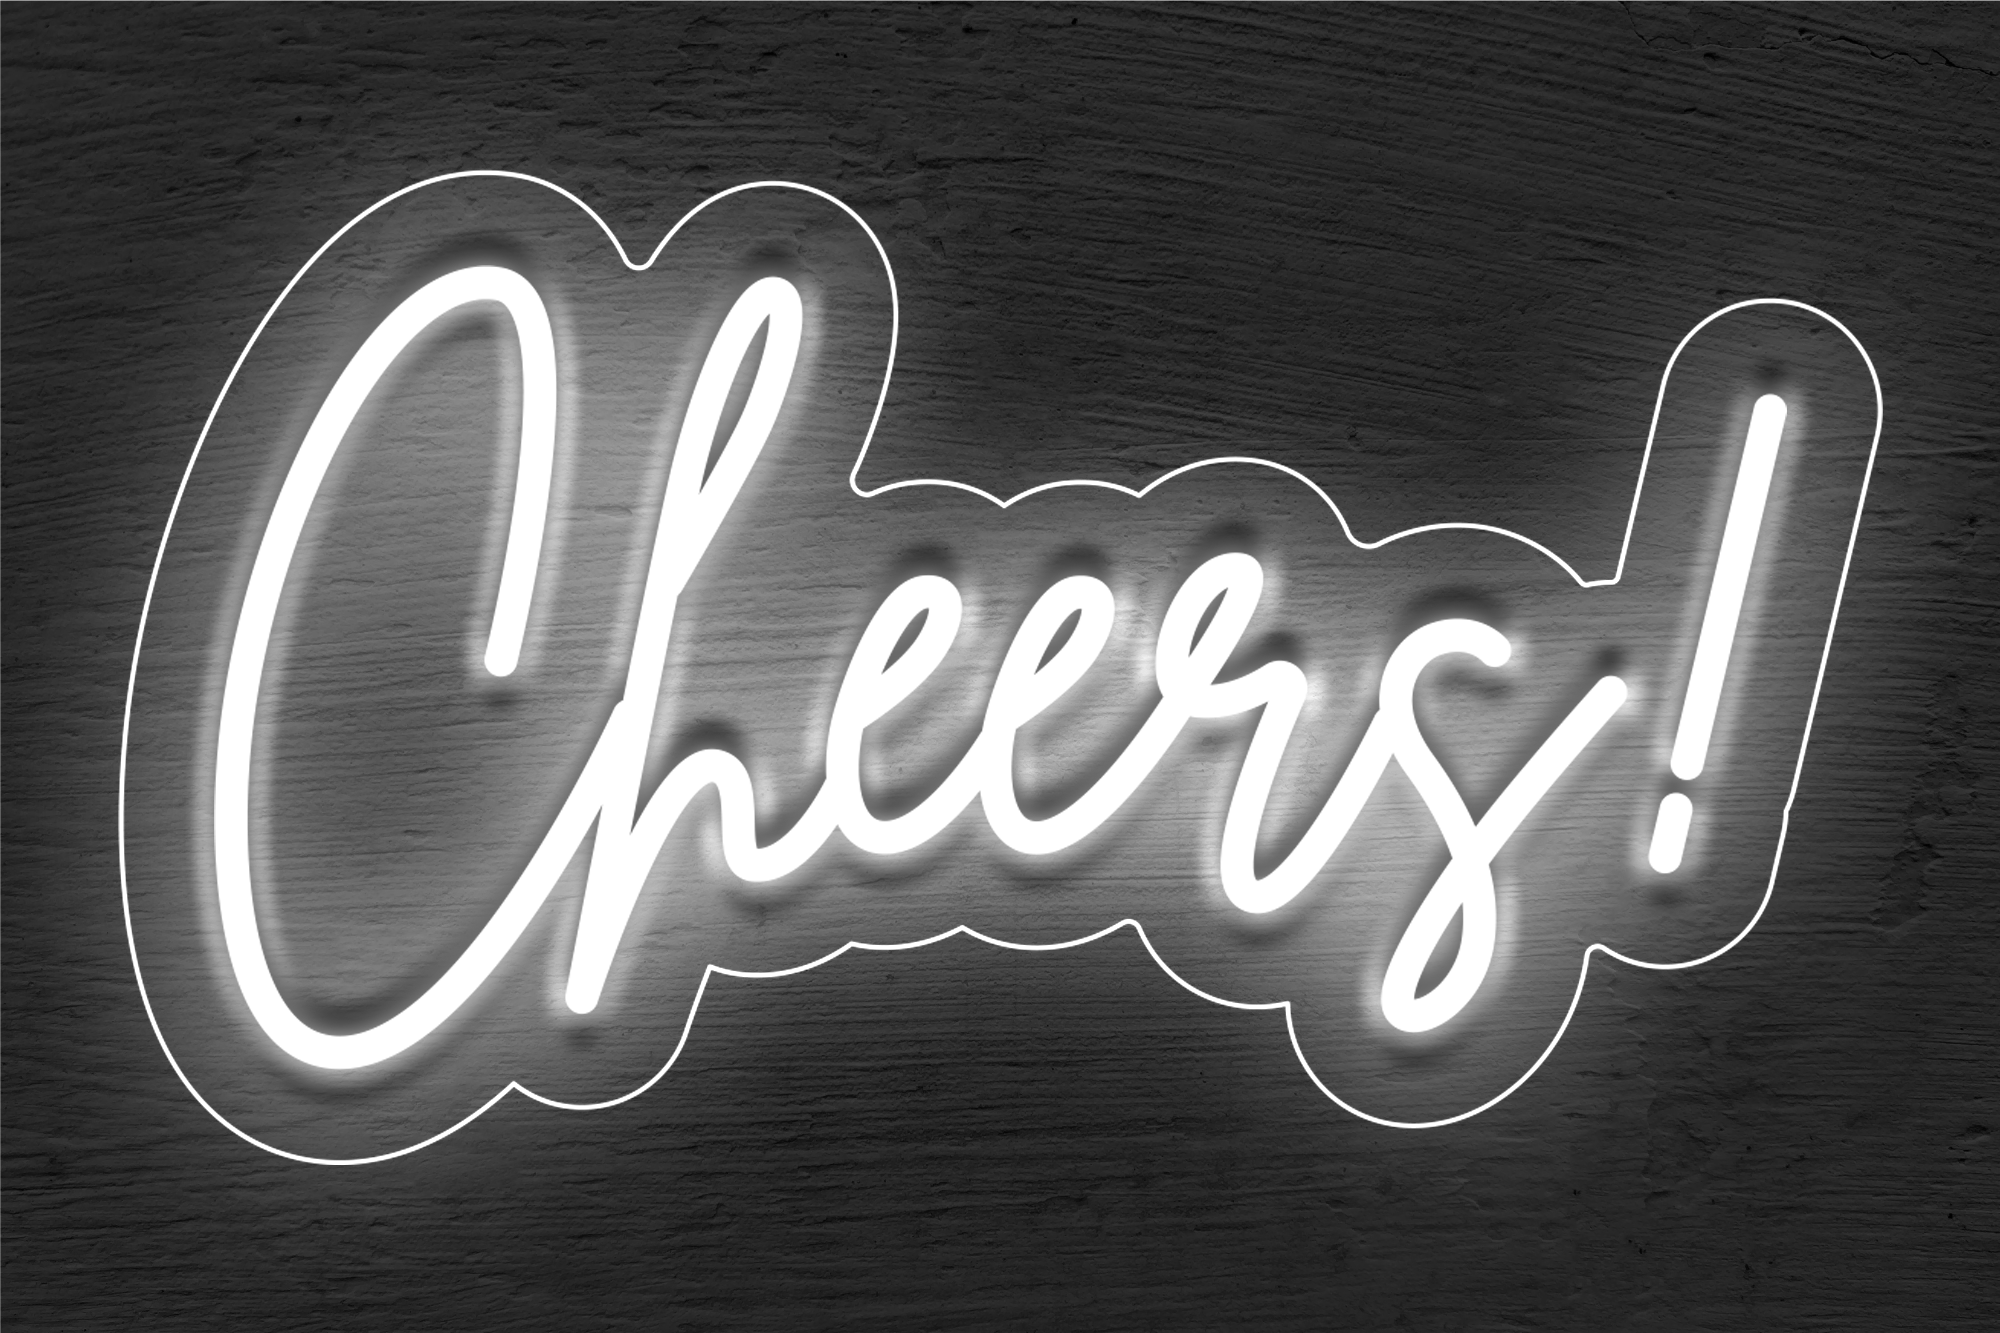 "Cheers!" LED Neon Sign